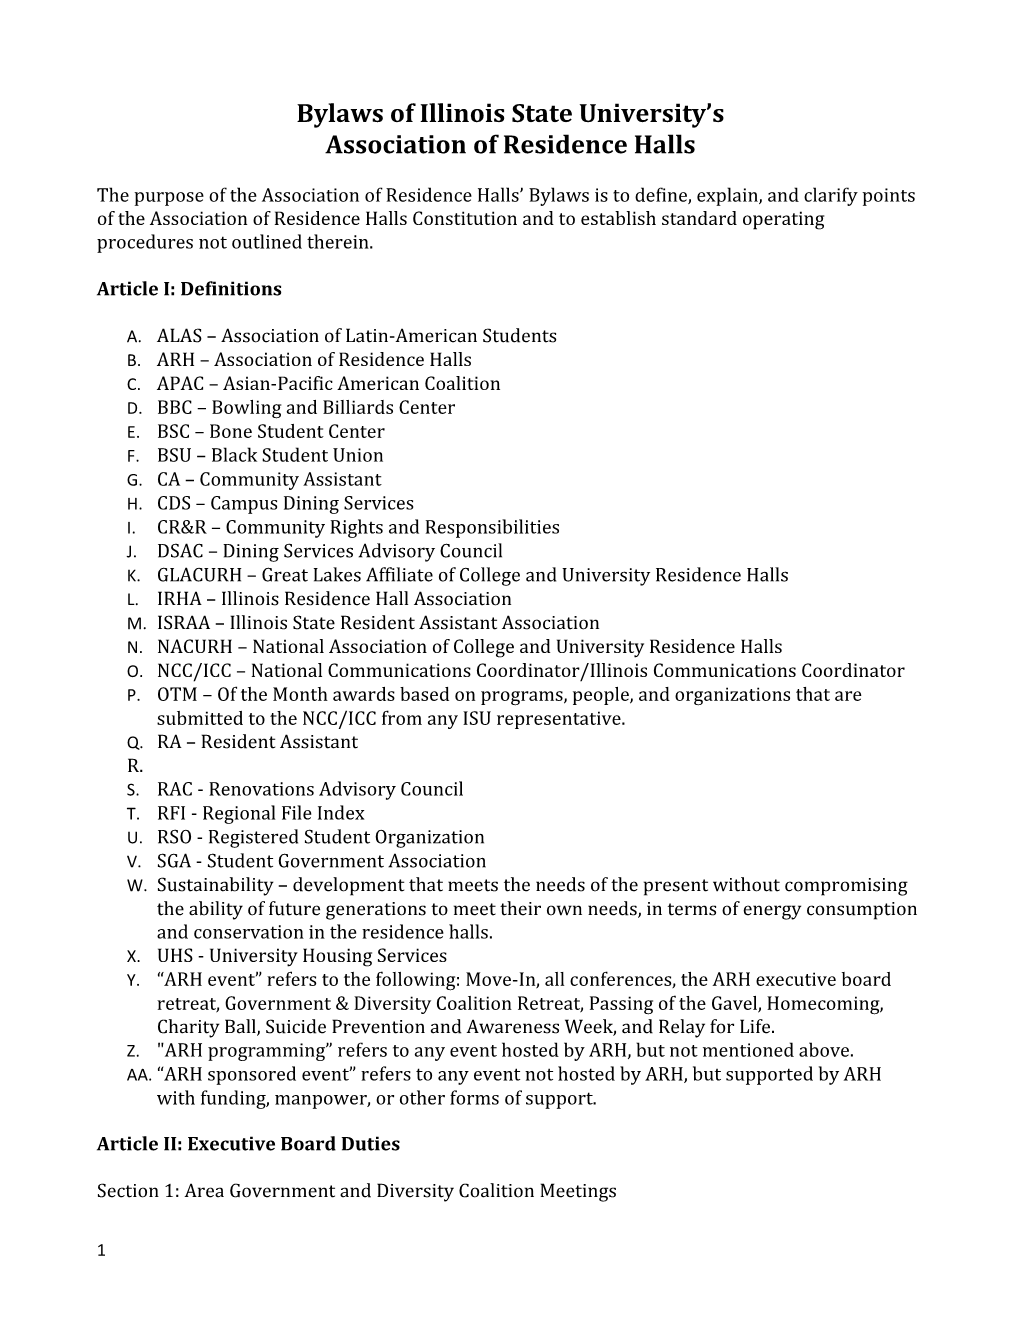 Bylaws of the Association of Residence Halls